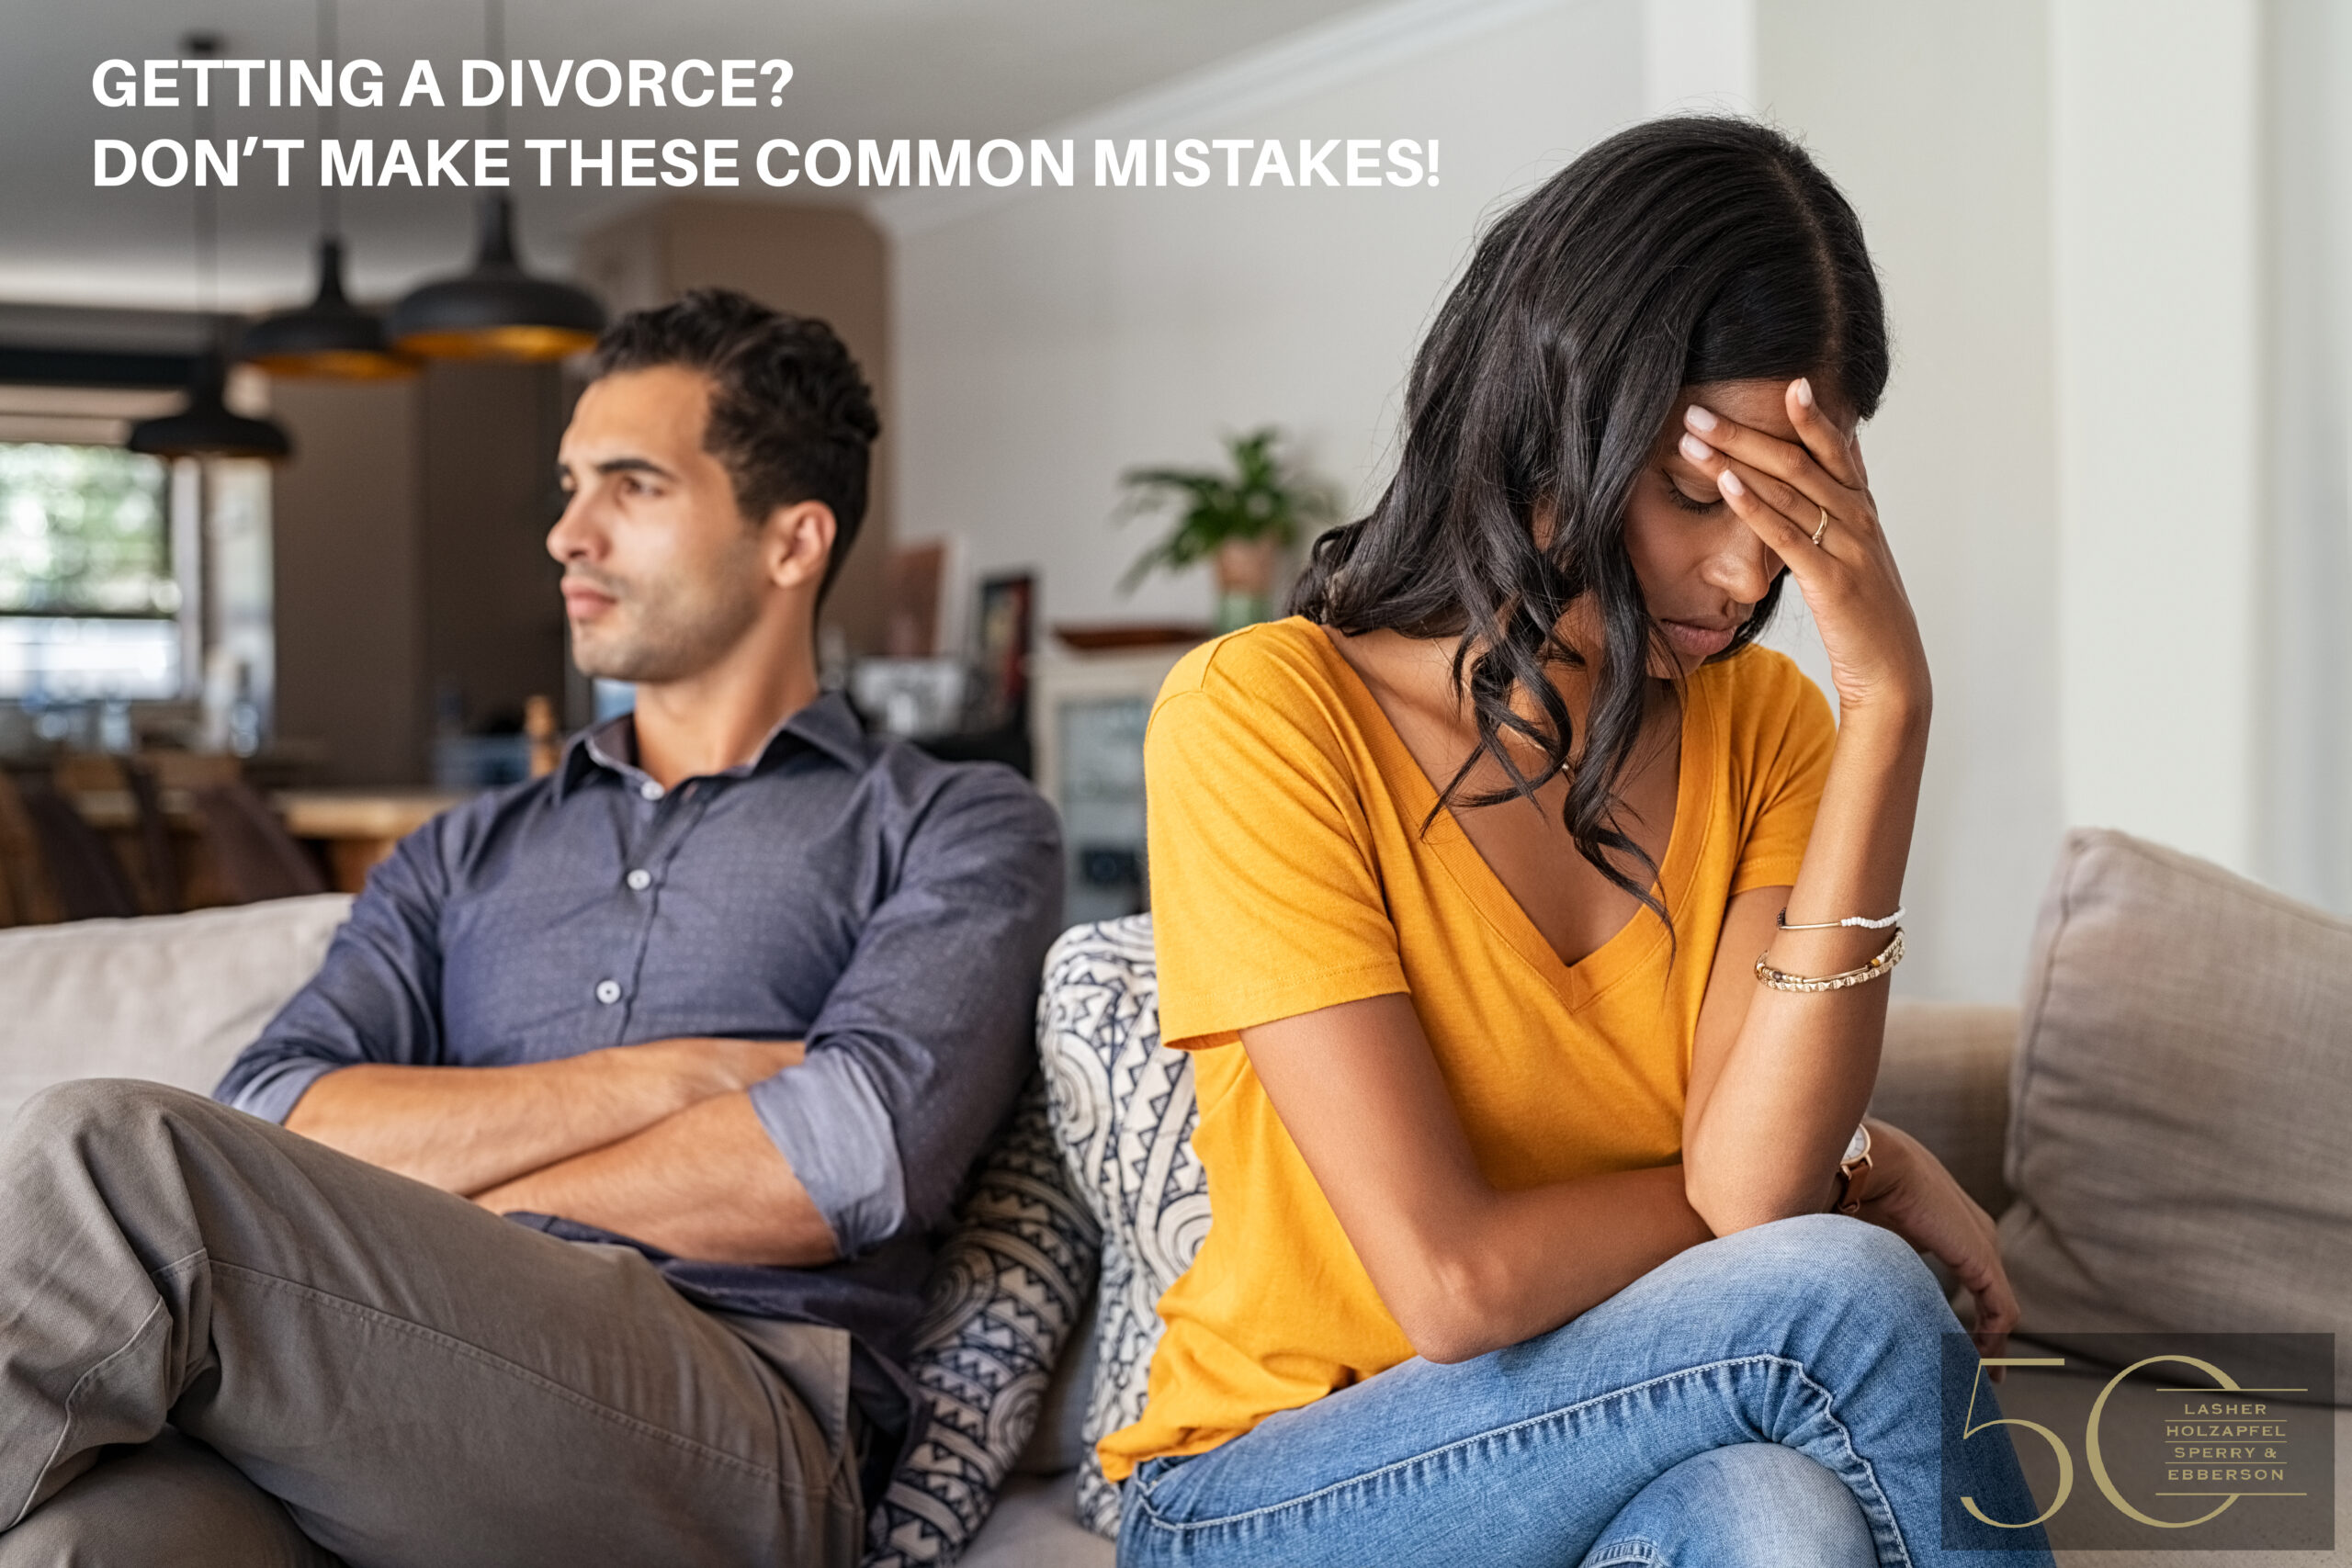 Getting a Divorce? Don’t Make These Common Mistakes!